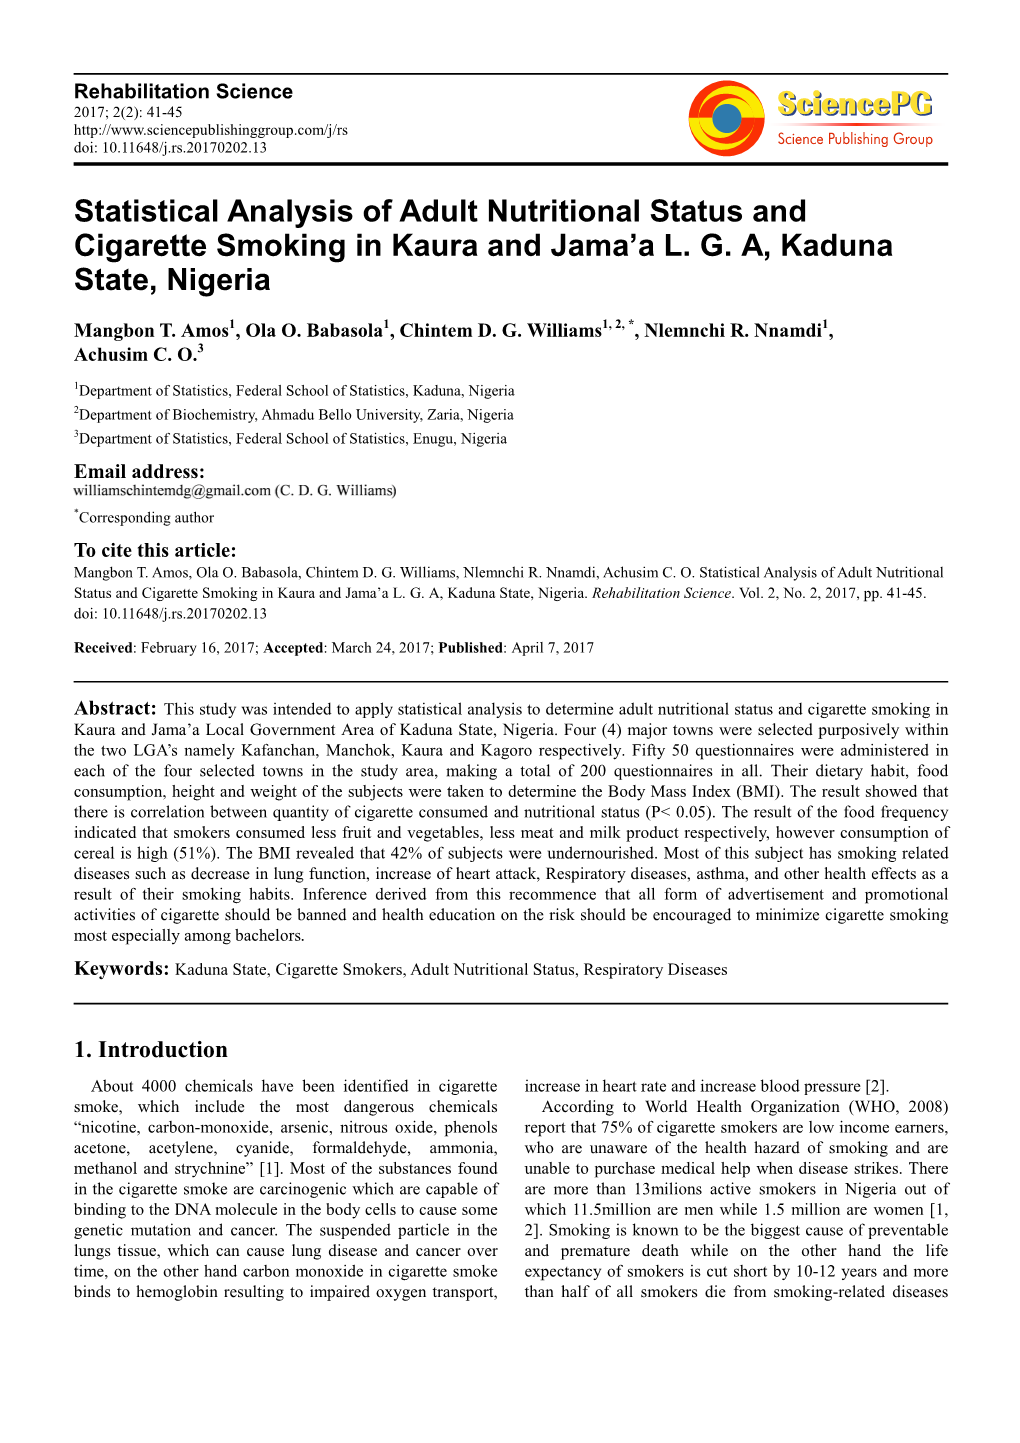 Statistical Analysis of Adult Nutritional Status and Cigarette Smoking in Kaura and Jama’A L